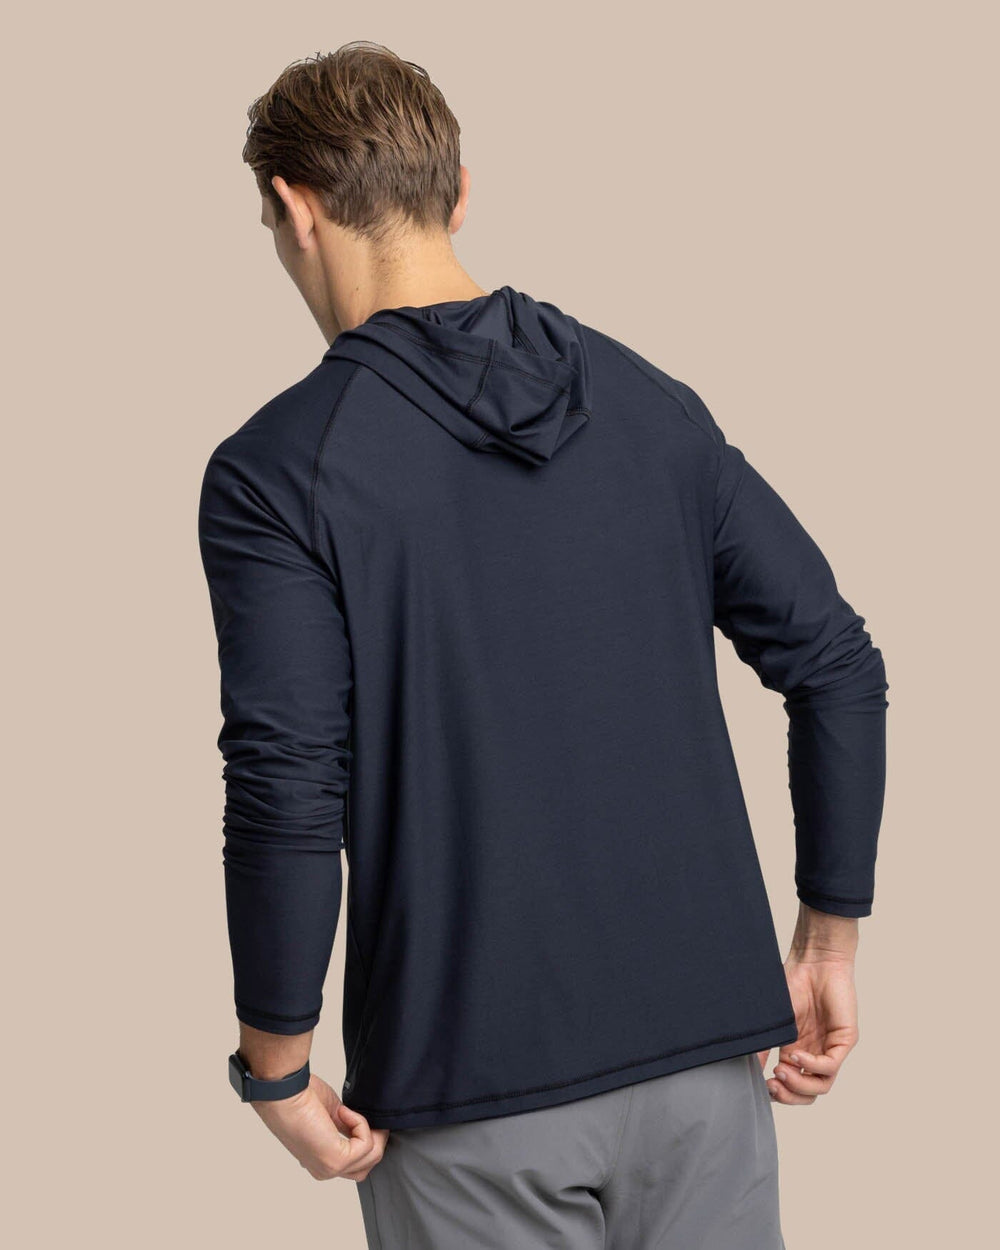 The back view of the Southern Tide brrr-illiant Performance Hoodie by Southern Tide - Caviar Black